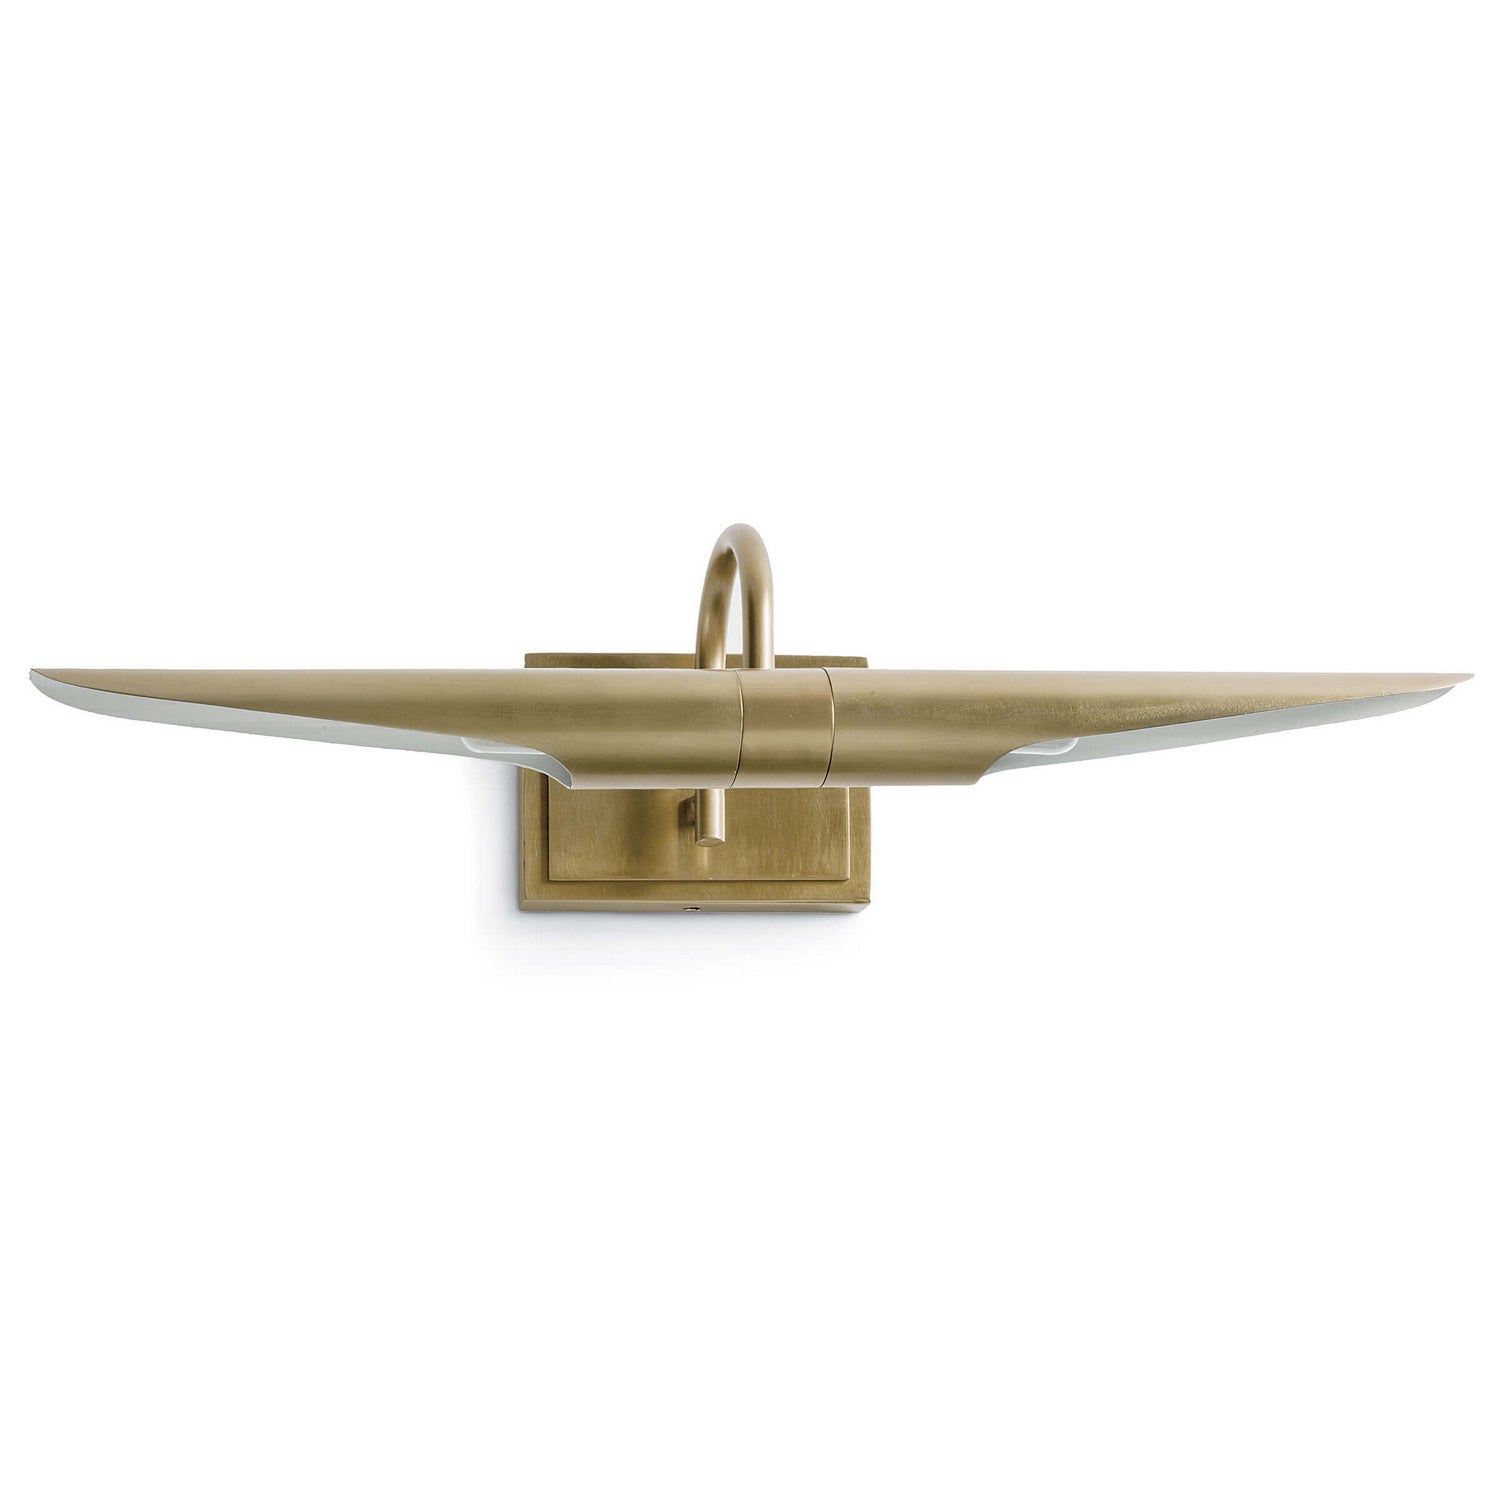 Regina Andrew 15-1047NB Redford Two Light Wall Sconce Natural Brass